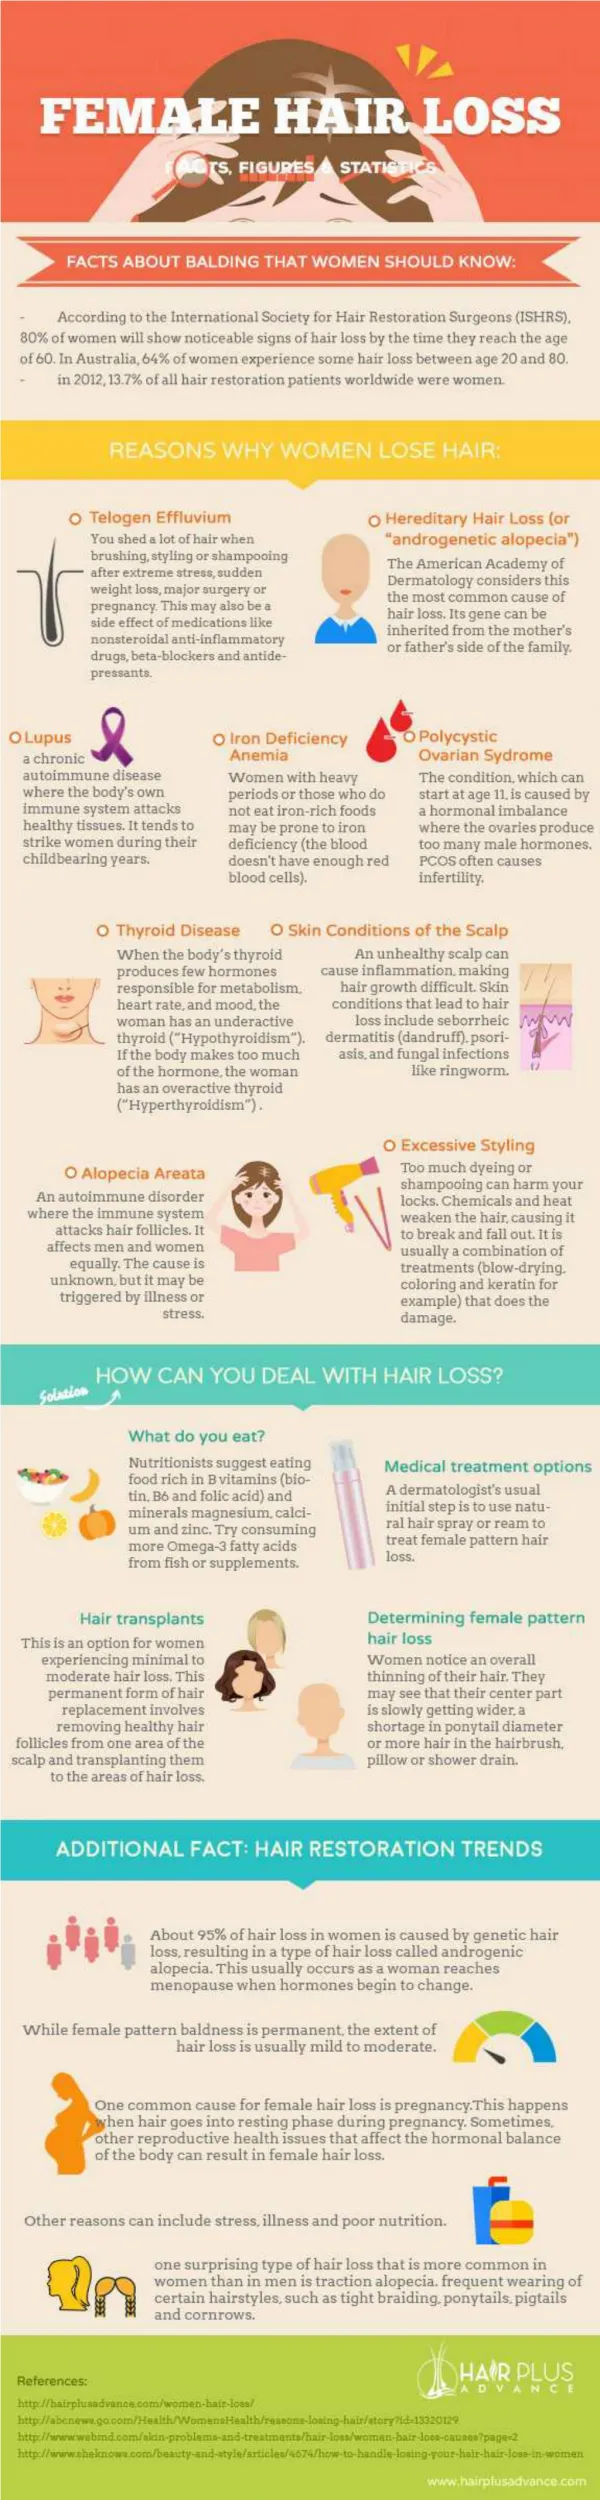 [Infographic] Female Hair Loss Facts and Statistics